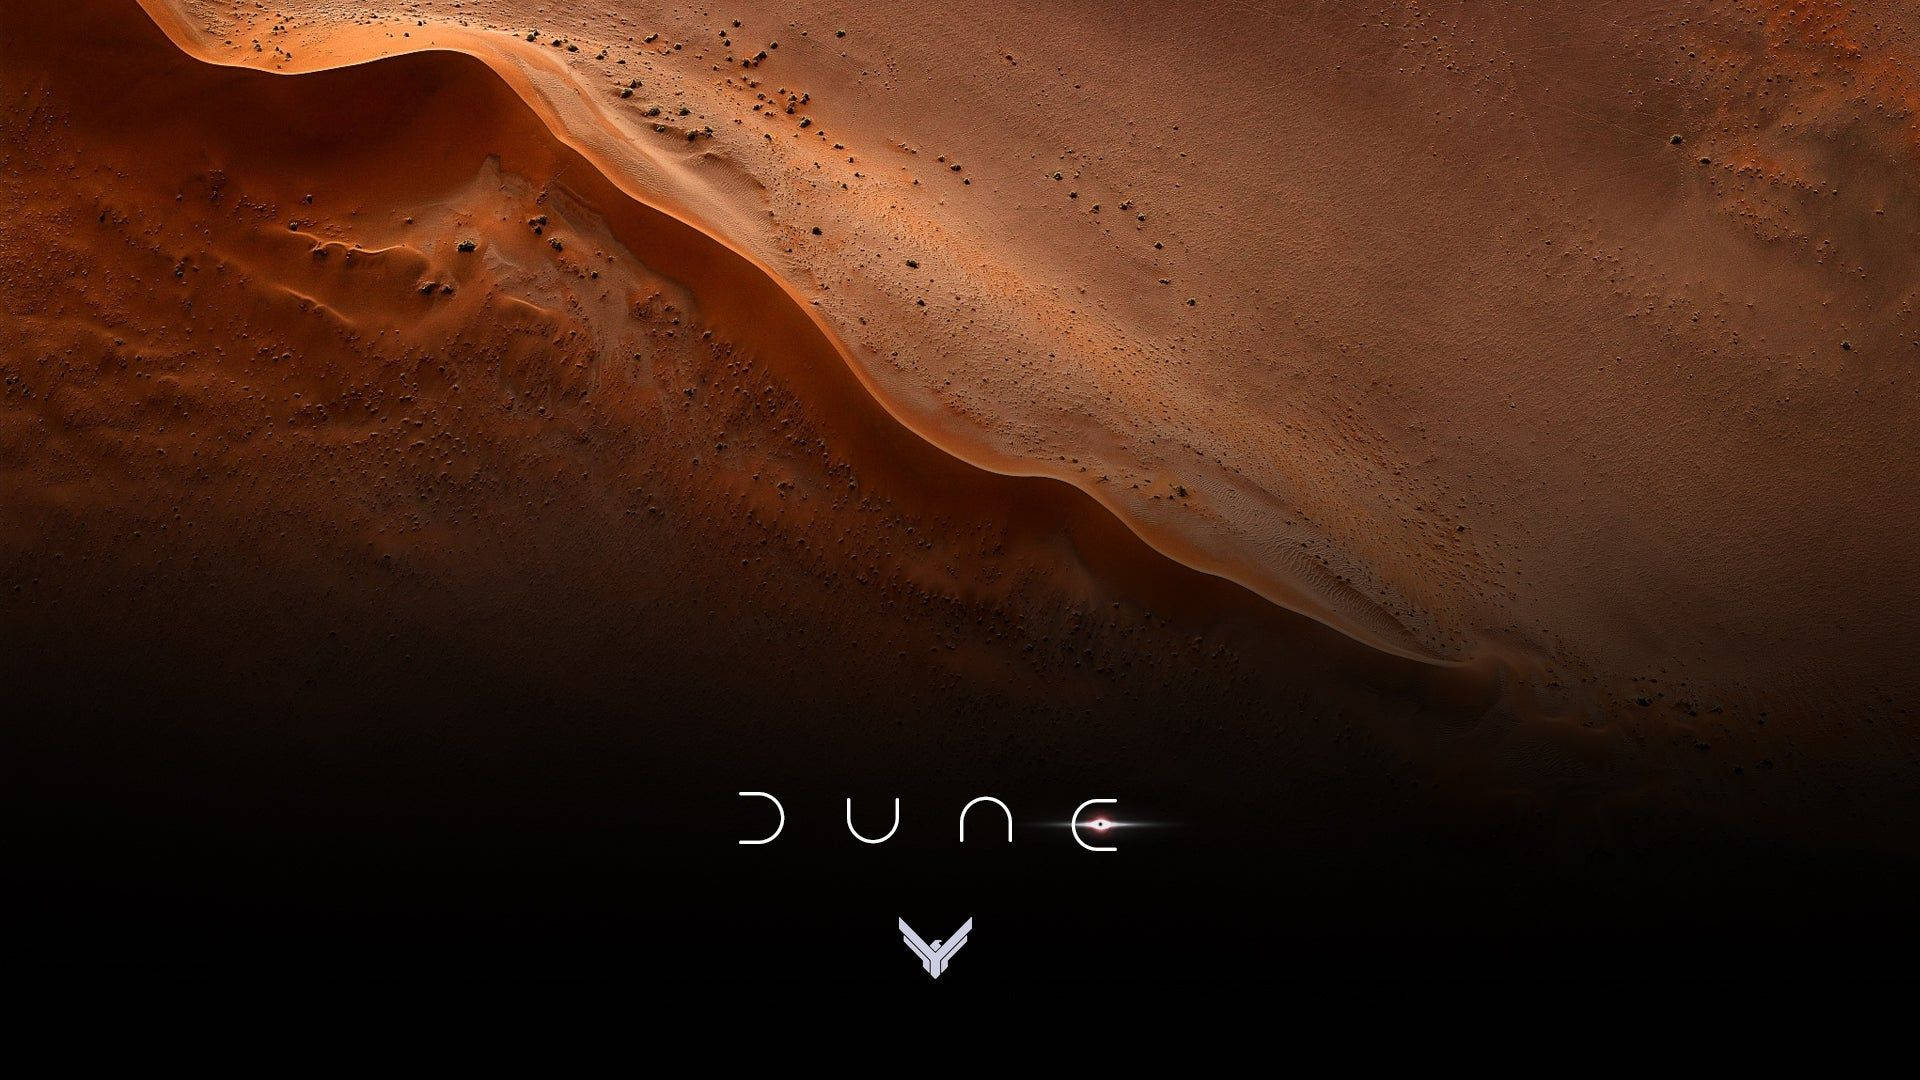 Dune - A Desert With A Red And White Background Wallpaper